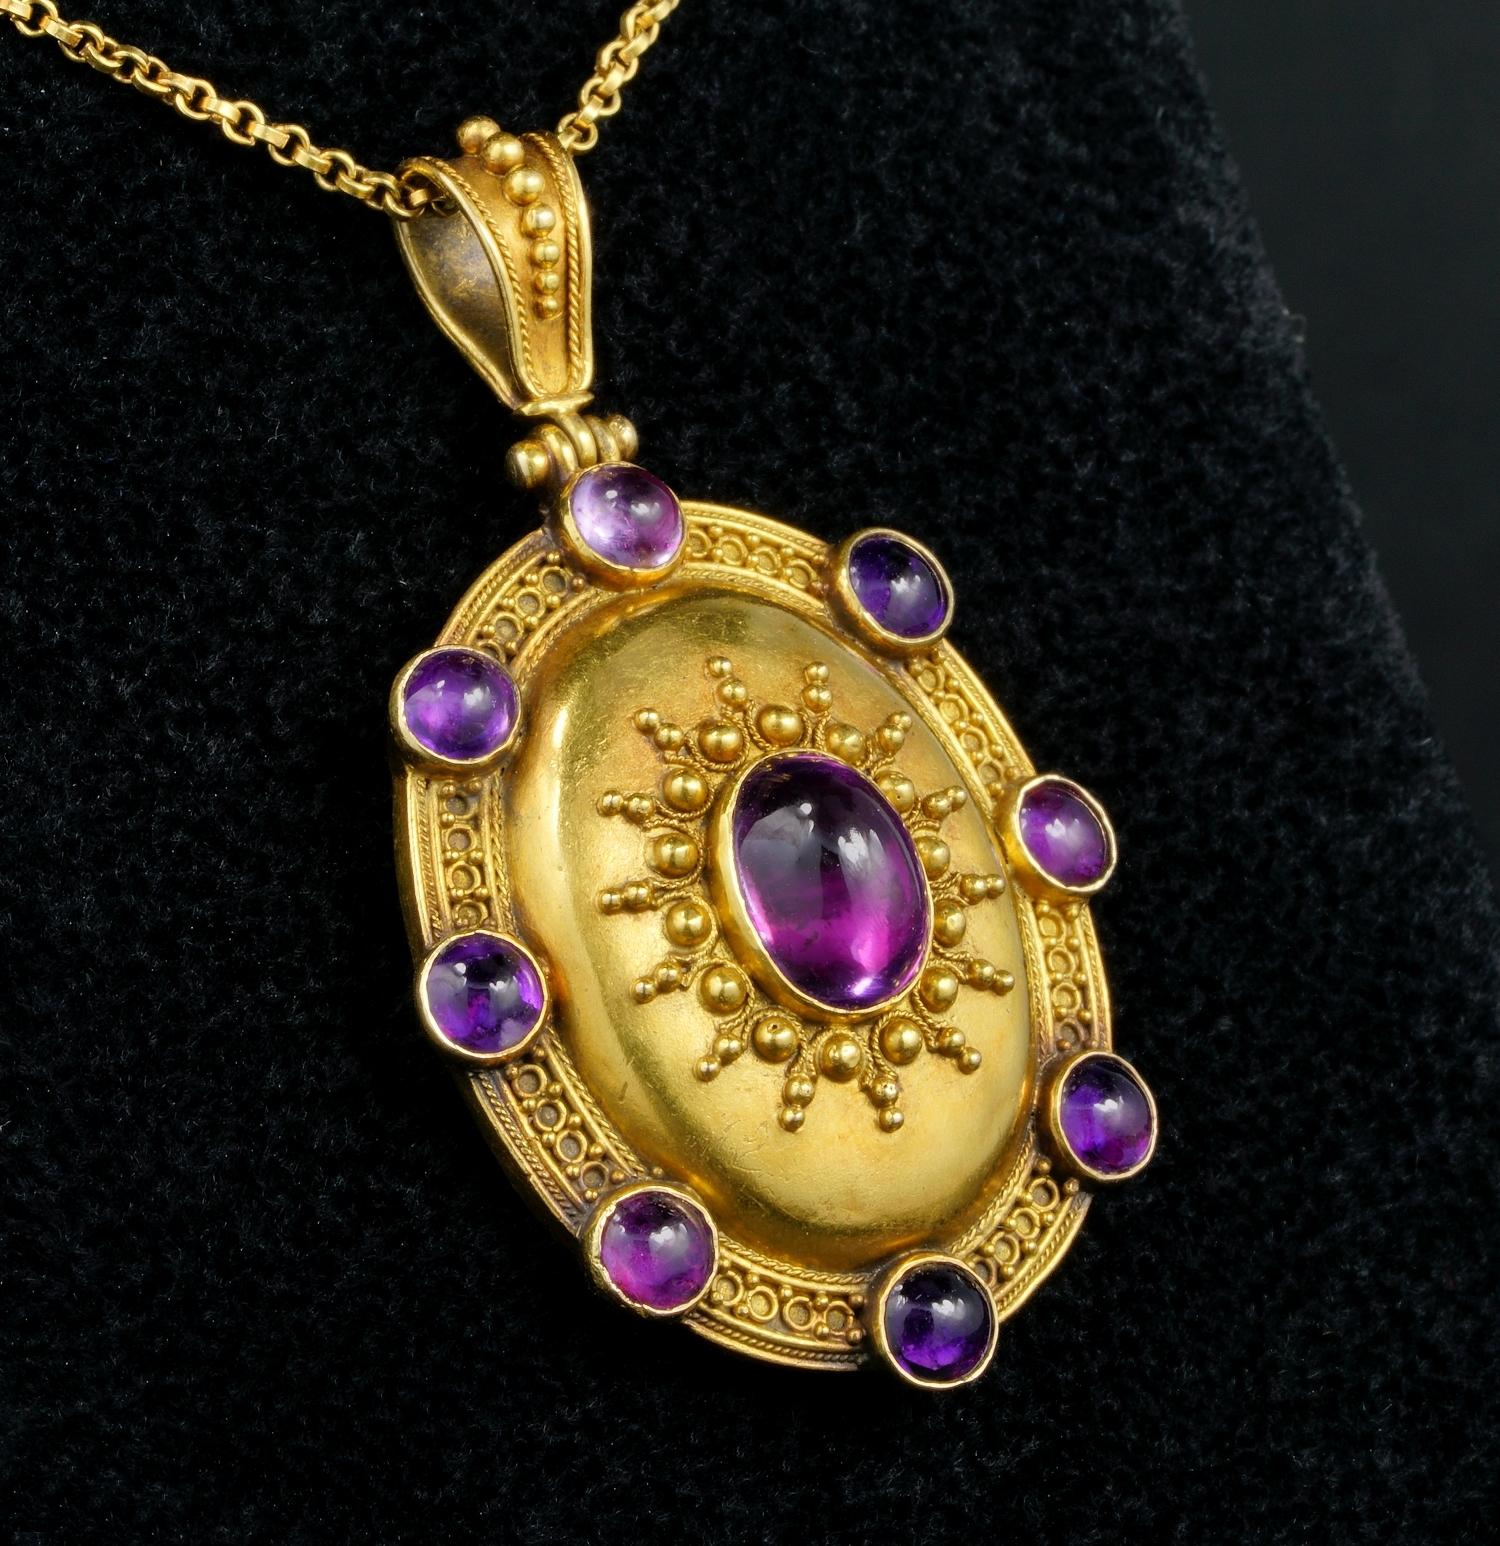 Victorian Carlo Giuliano Etruscan Revival Amethyst Locket In Good Condition For Sale In Napoli, IT